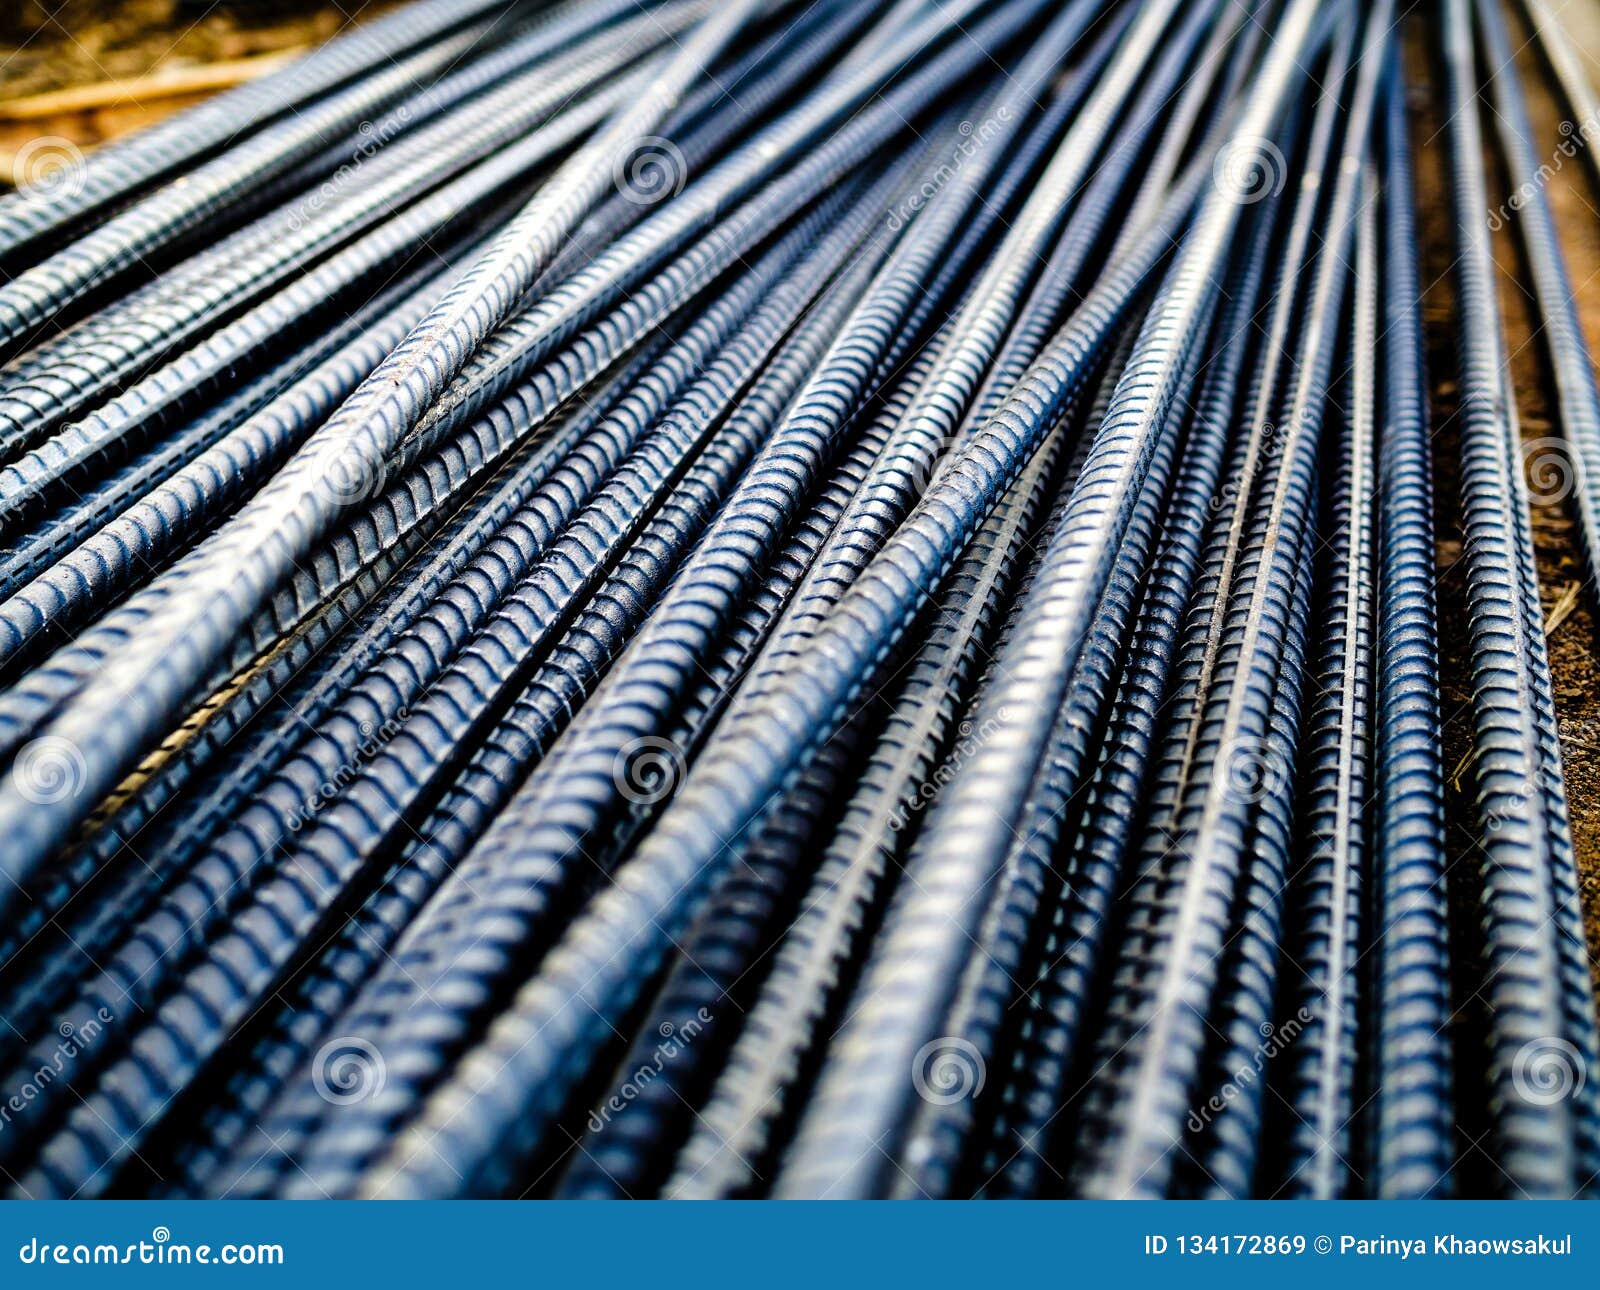 stack of steel rebar for reinforcement concrete at construction site